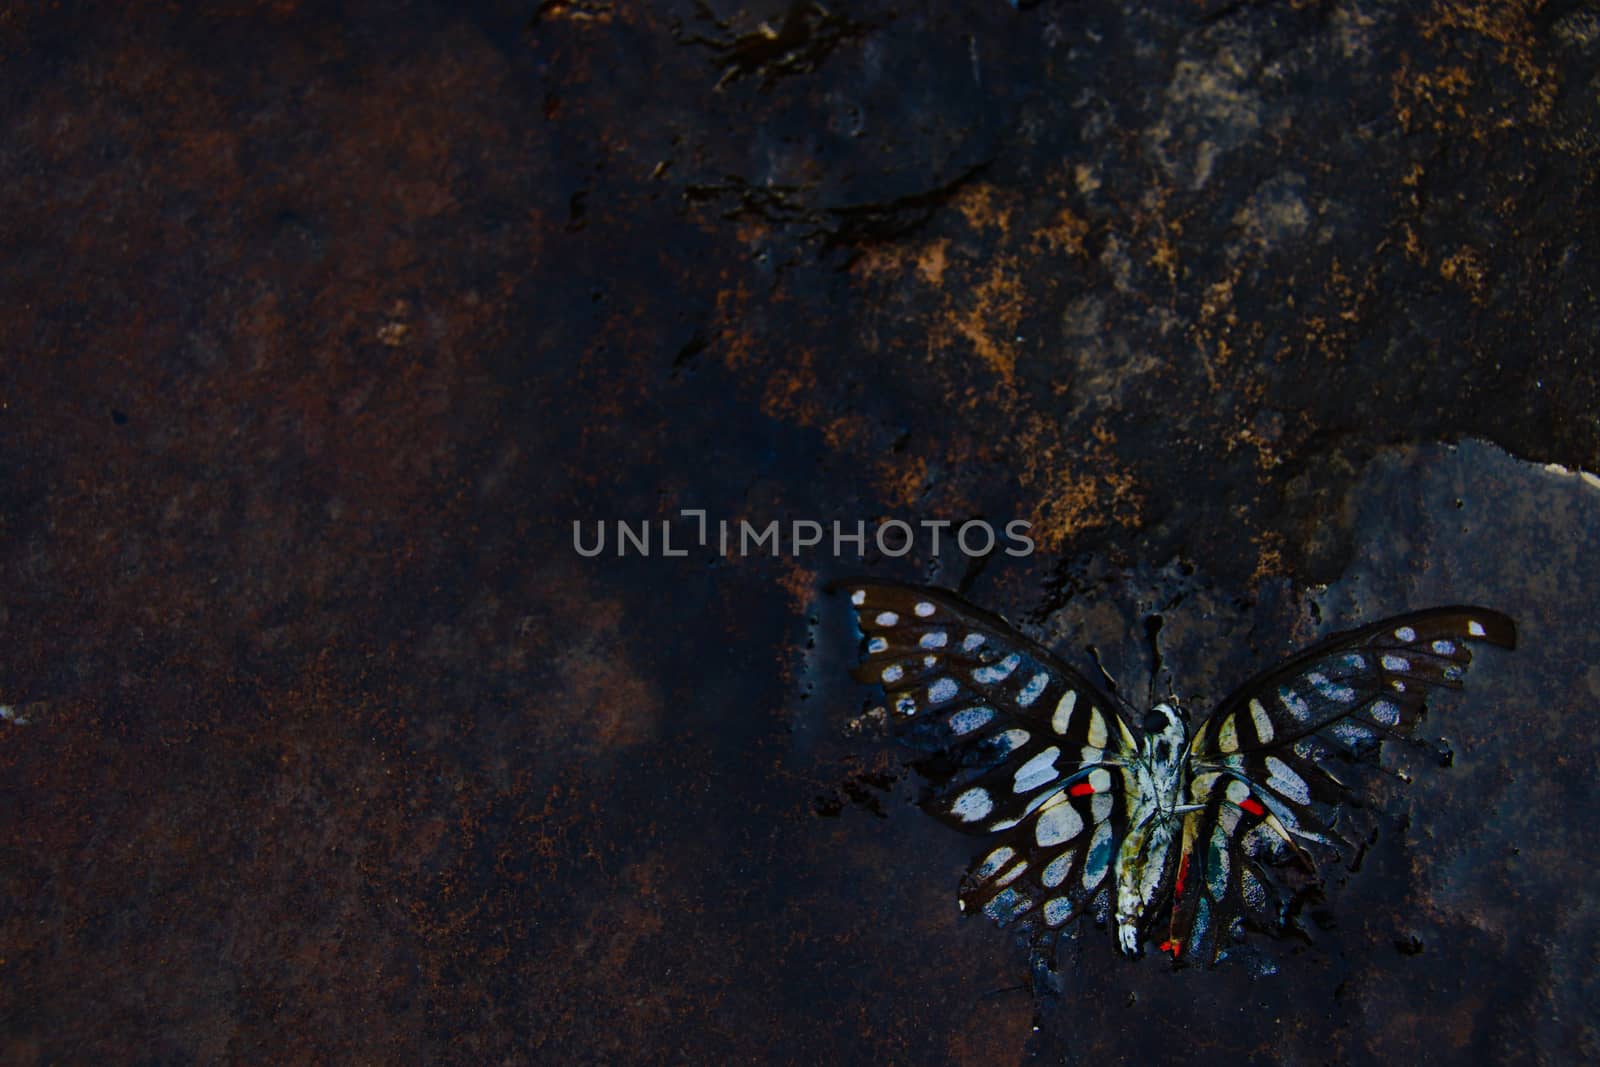 Conceptual photo of a dead butterfly in water showing concept of mental health illness like depression and suicide during social distancing, lock down and isolation due to the covid-19 pandemic